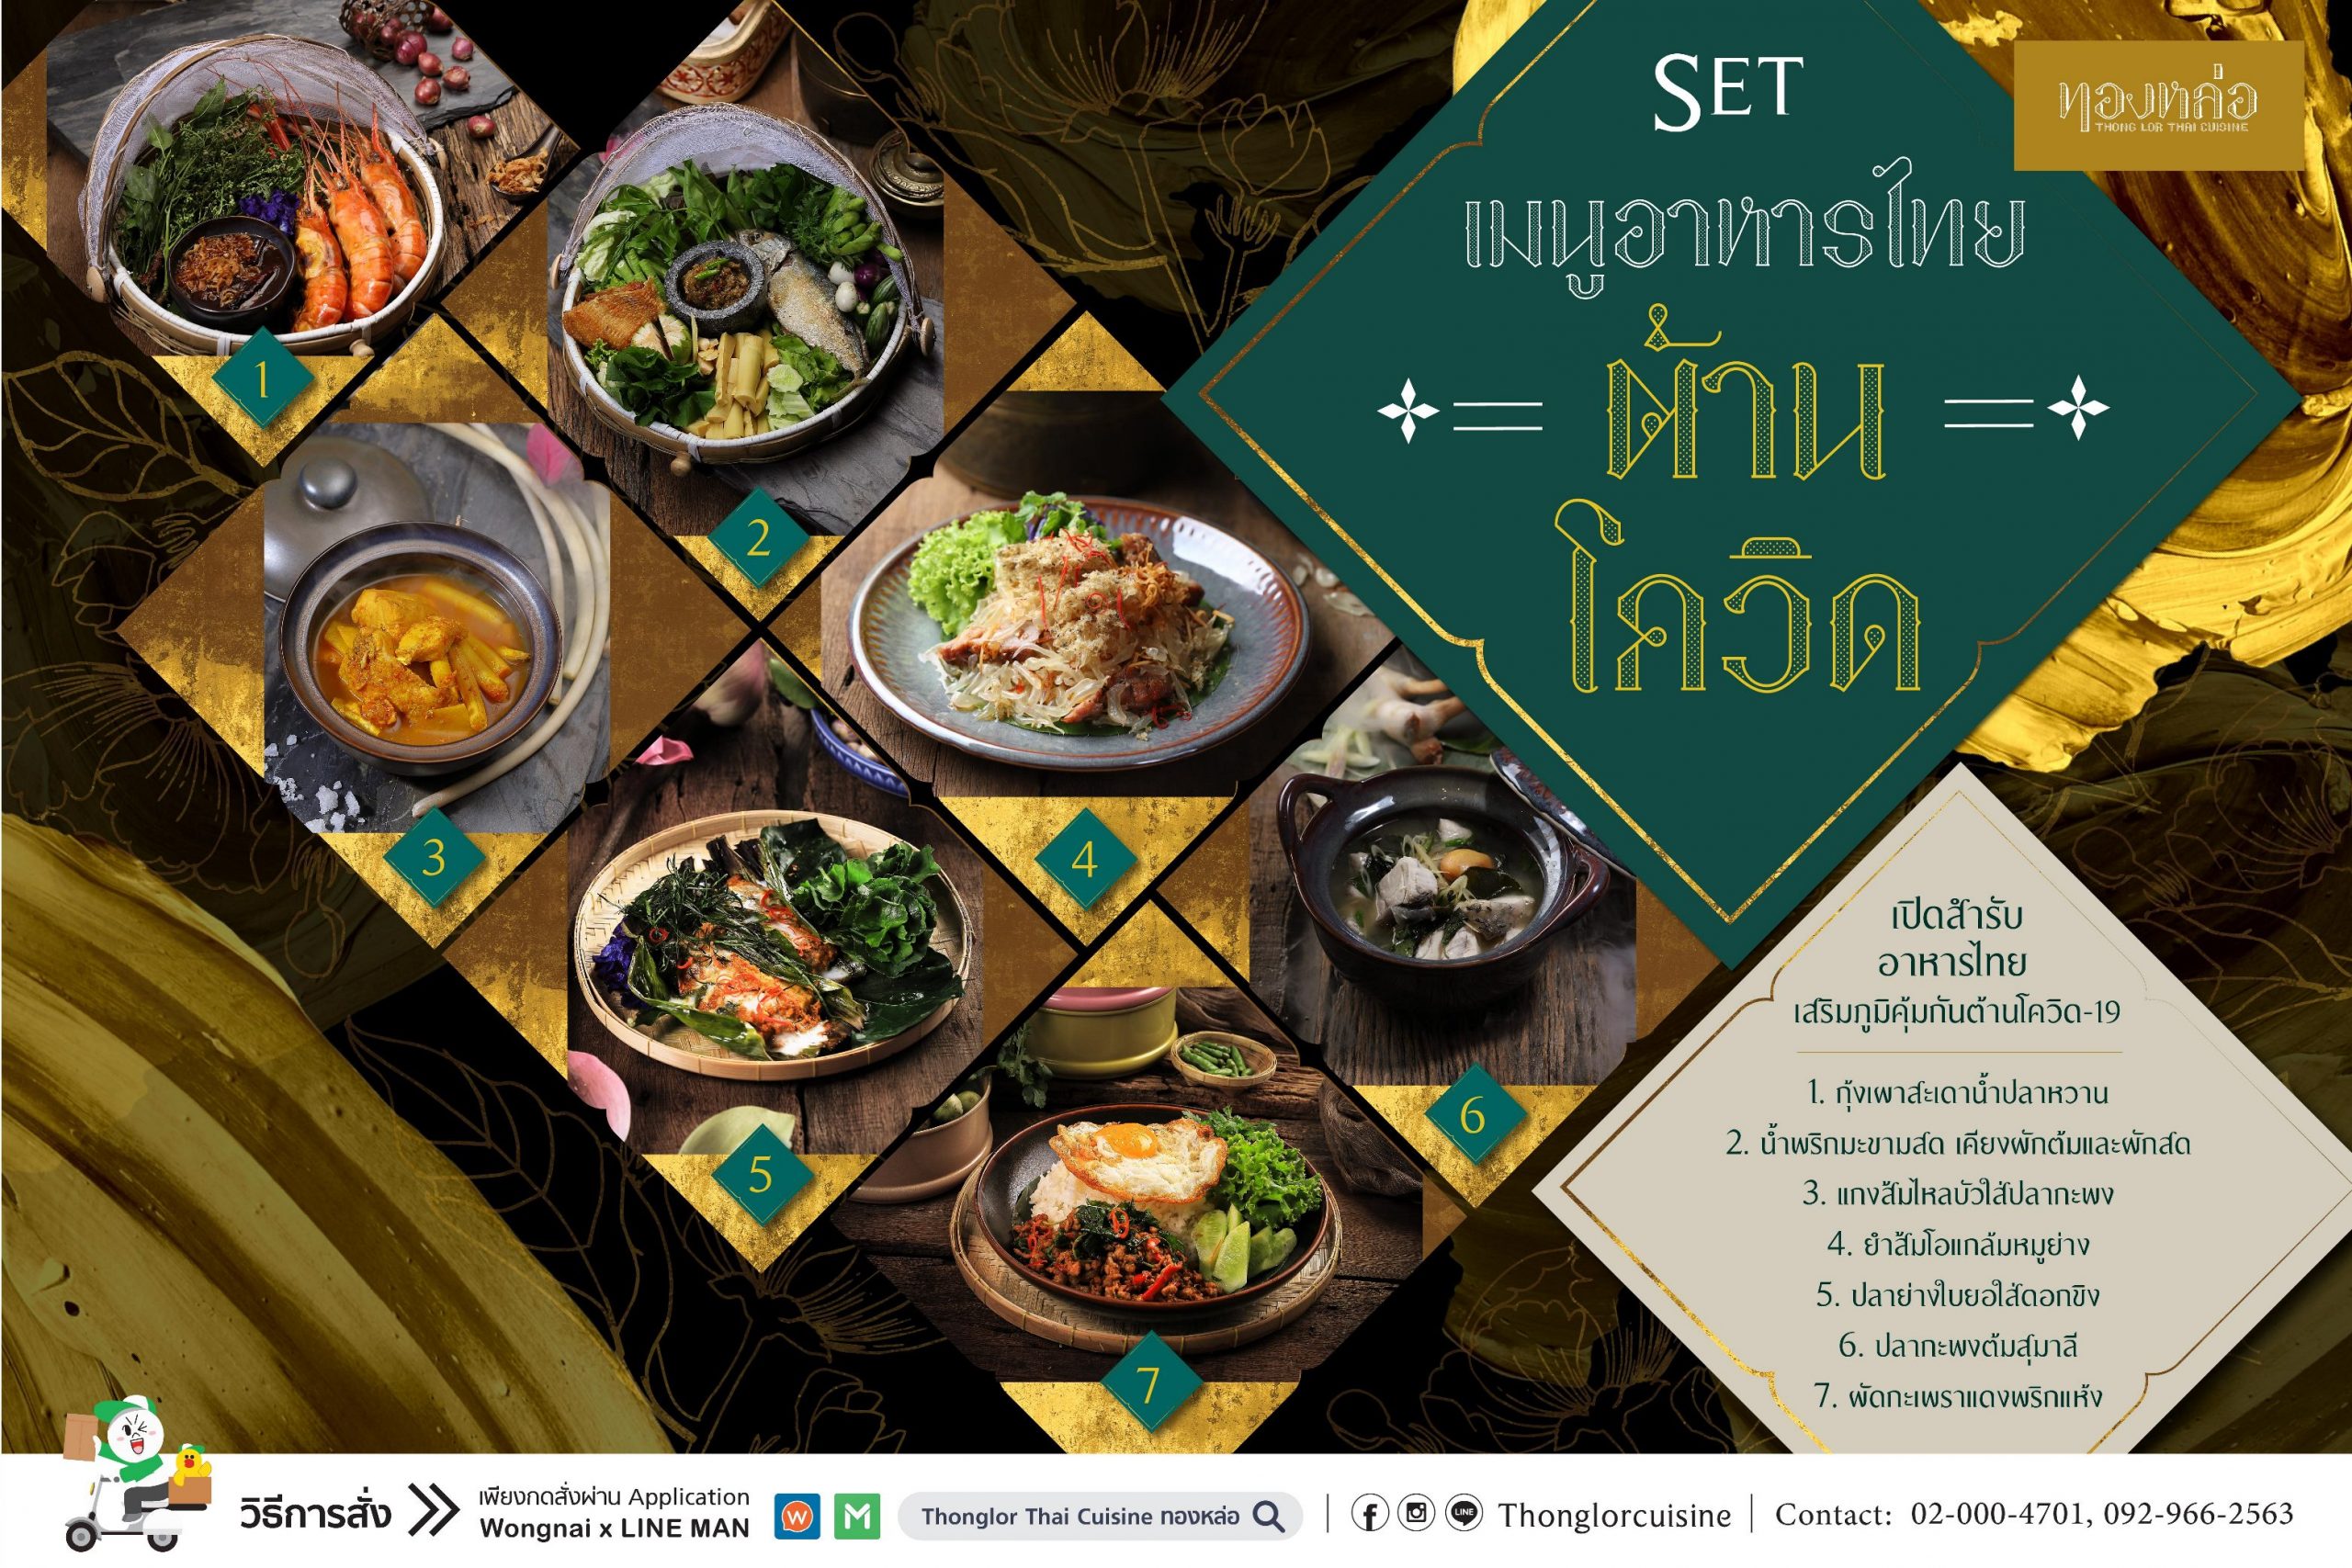 Thonglor Thai Cuisine recommends Thai food menu to strengthen immunity against COVID-19